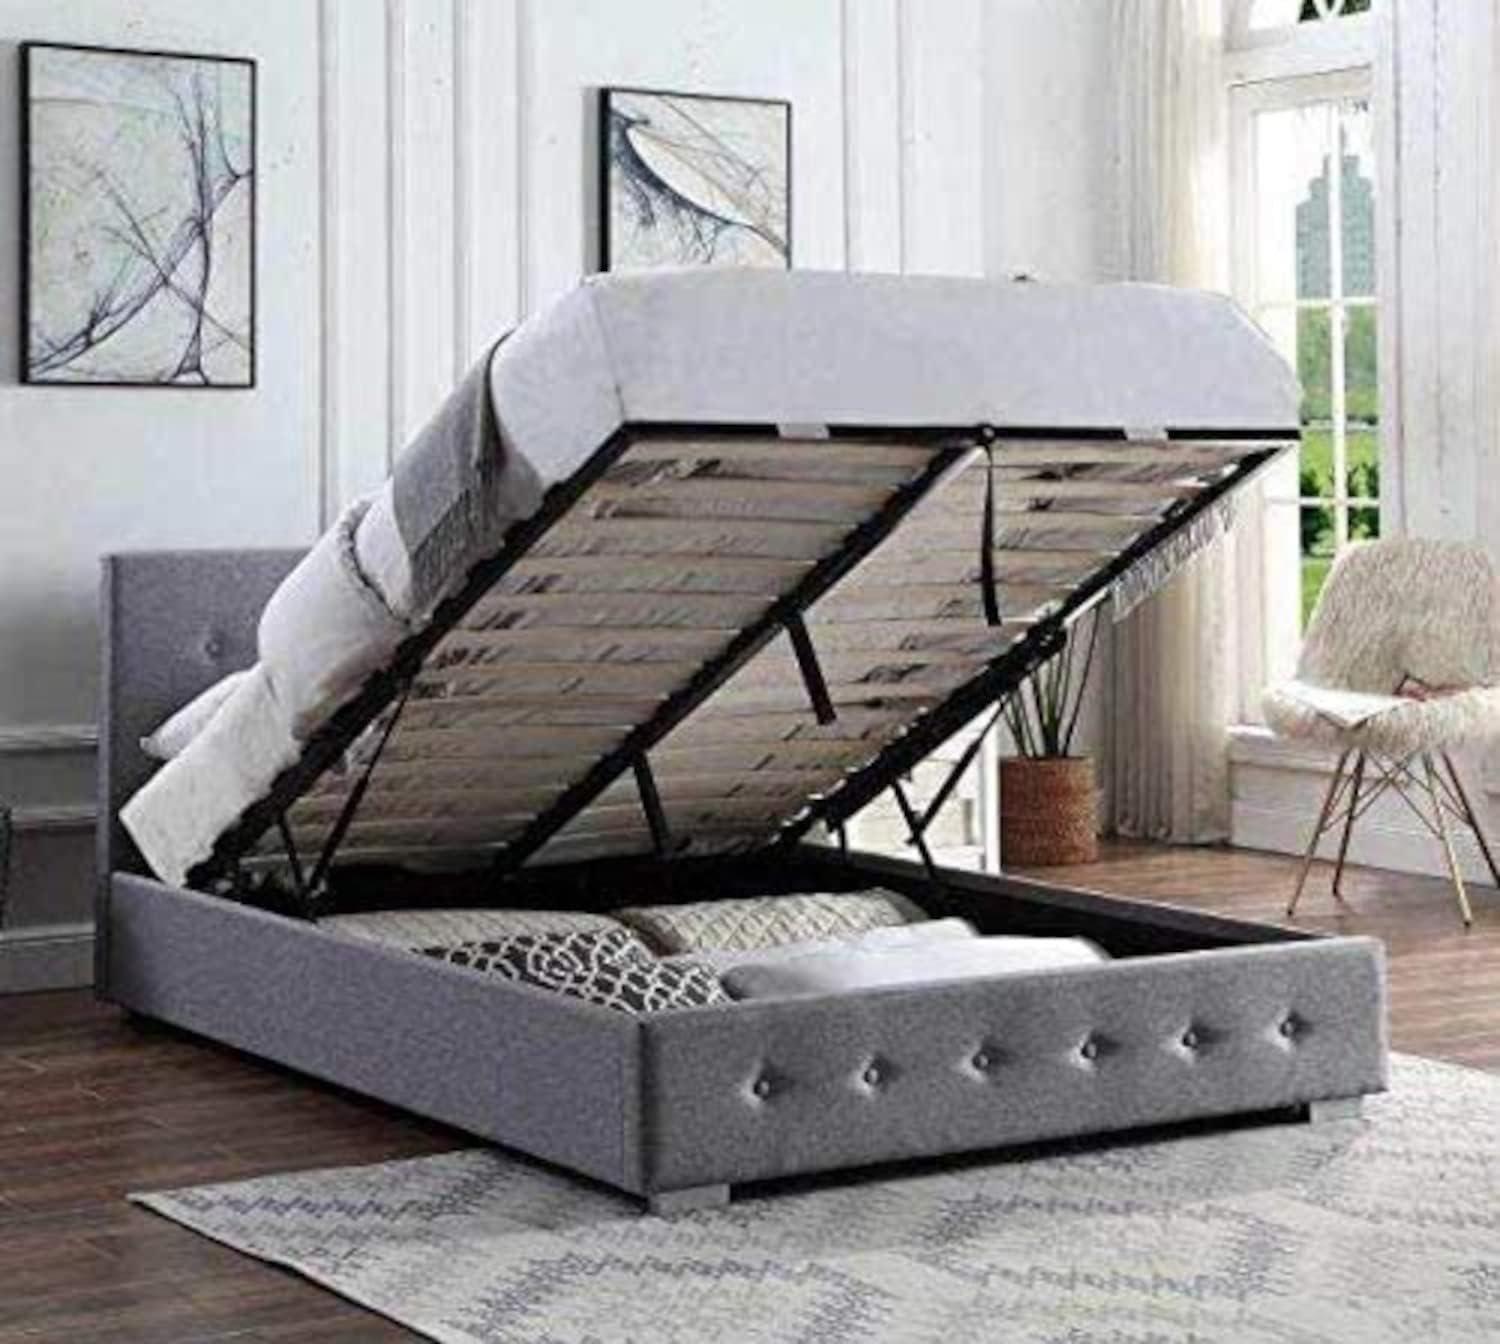 Grey Nicole Upholstered Ottoman Storage Bed With Pocket Sprung Mattress